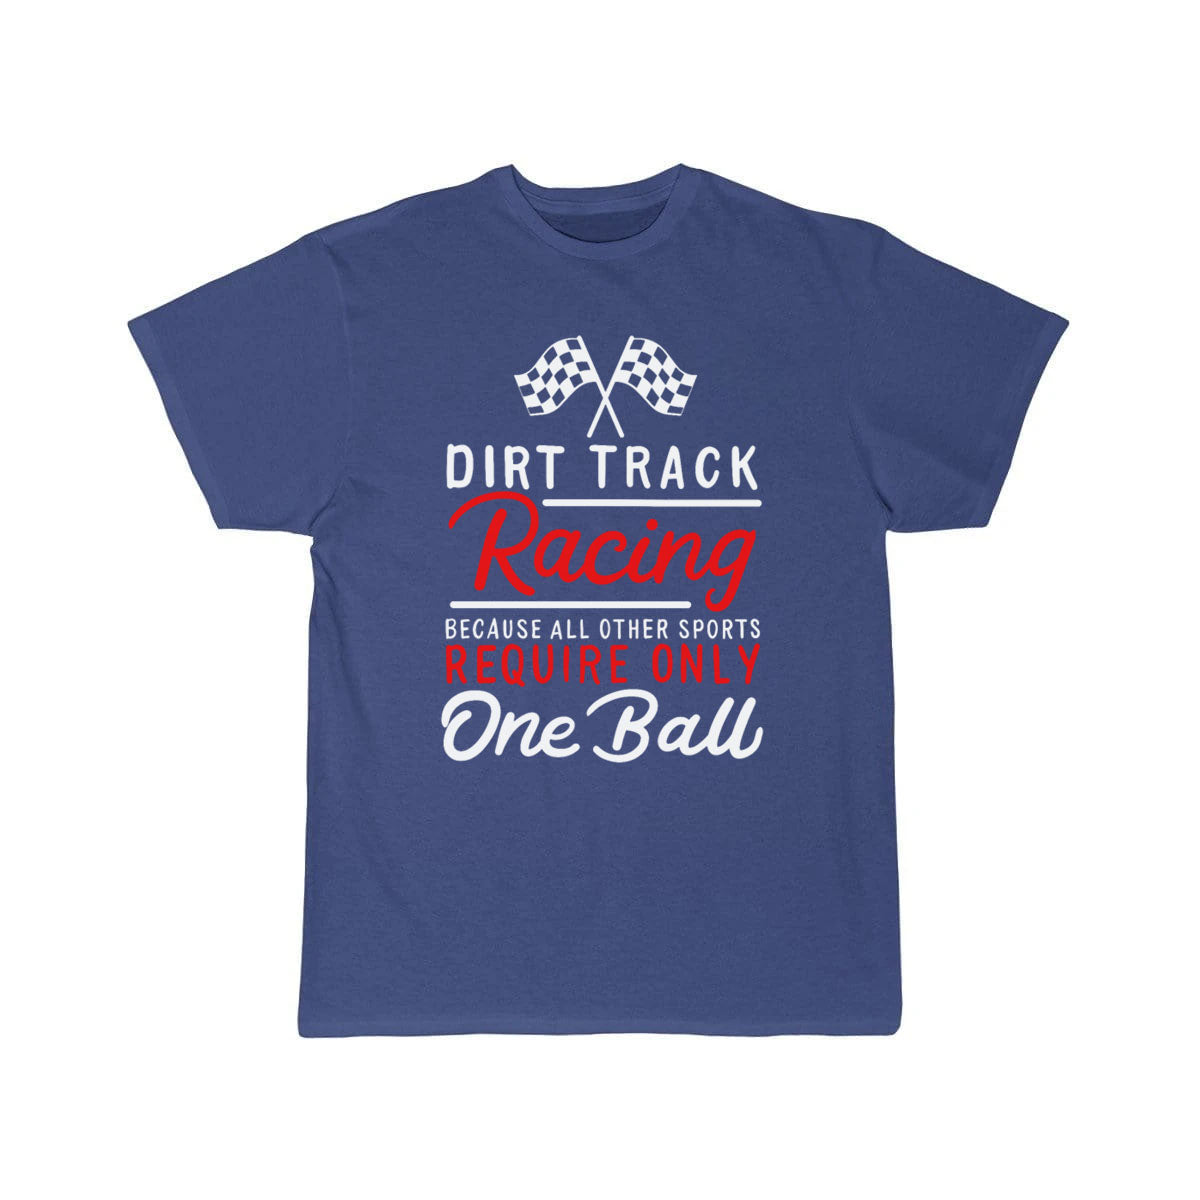 Dirt Track Racing Because All Other Sports Only T-SHIRT THE AV8R